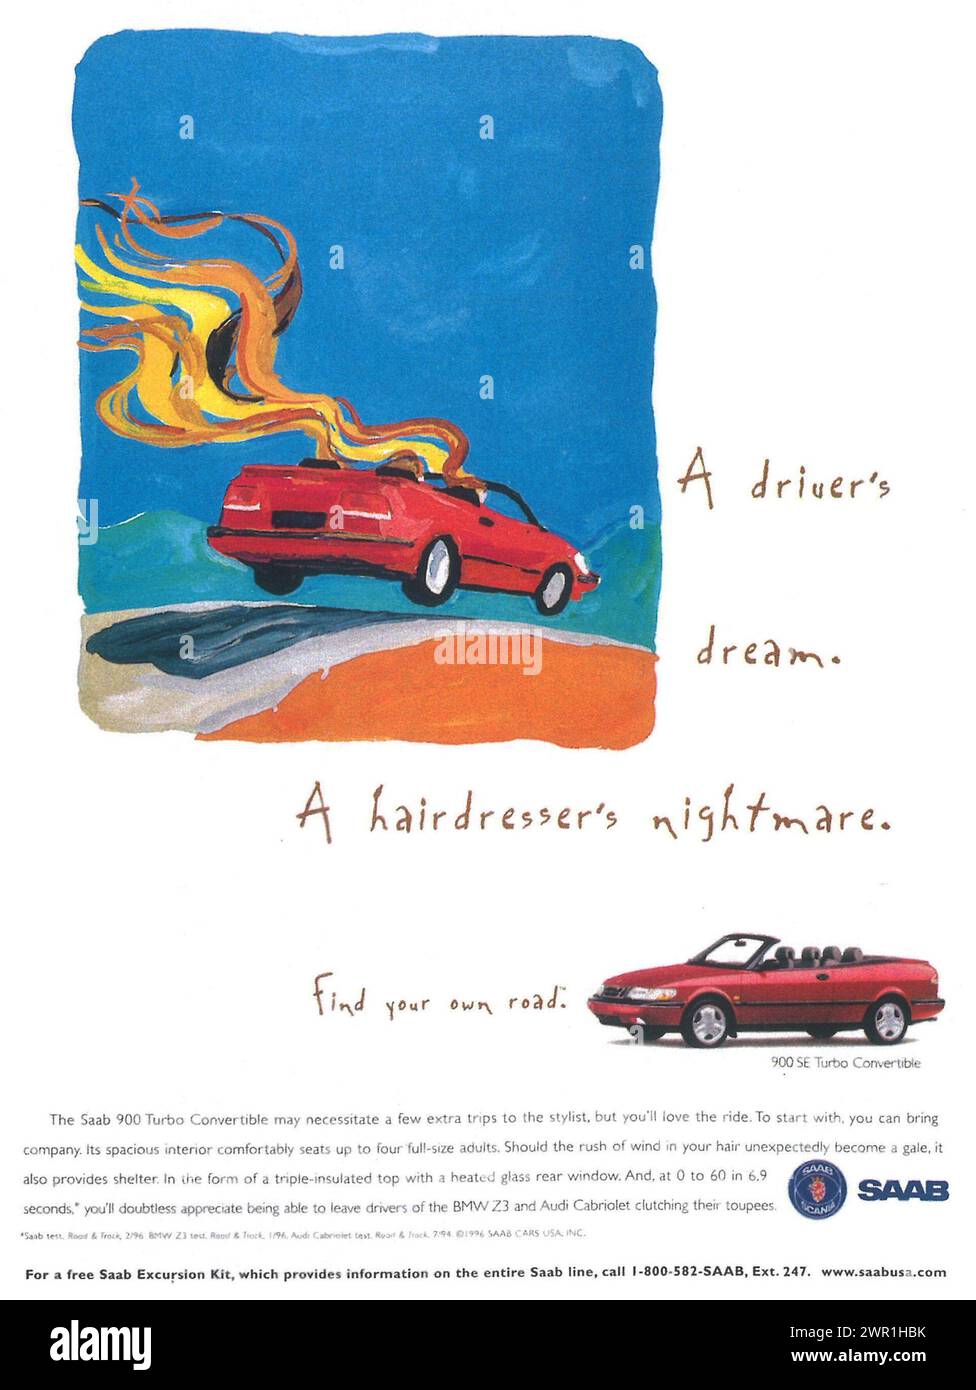 1996 Saab 900 SE Turbo Convertible Print Ad. 'A driver's dream. A hairdresser's nightmare.' Stock Photo